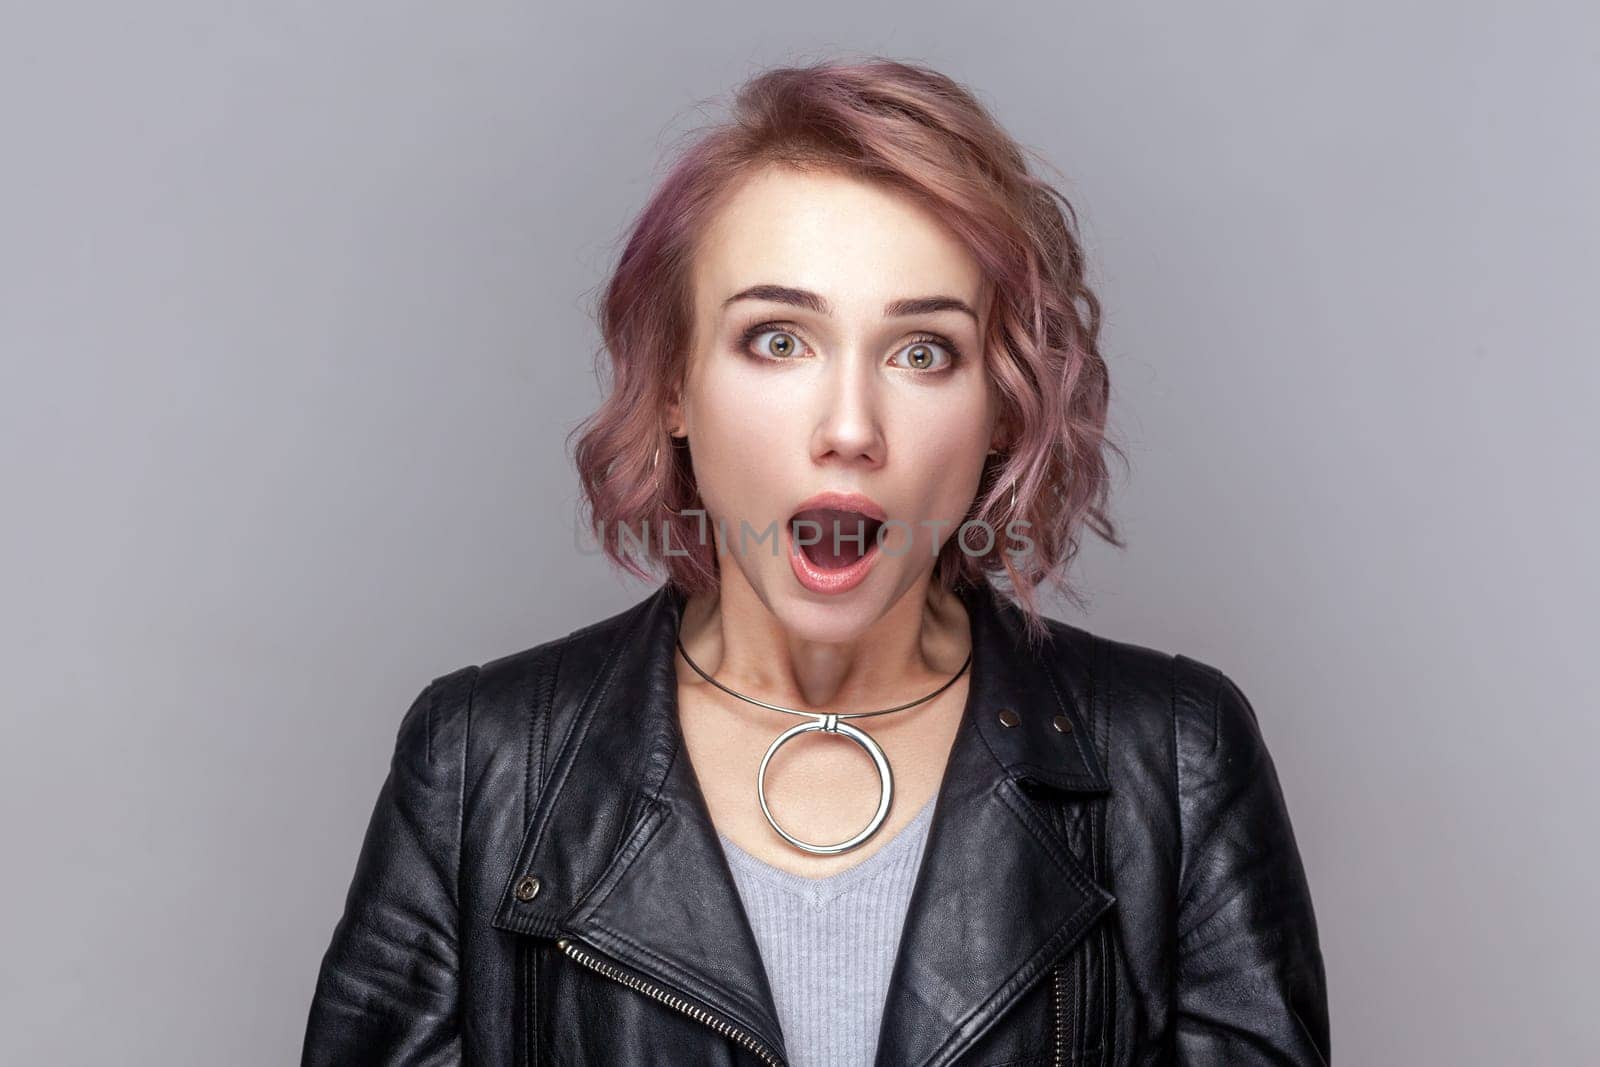 Portrait of shocked amazed surprised woman with short hairstyle standing looking at camera with big eyes and open mouth, wearing black leather jacket. Indoor studio shot isolated on grey background.